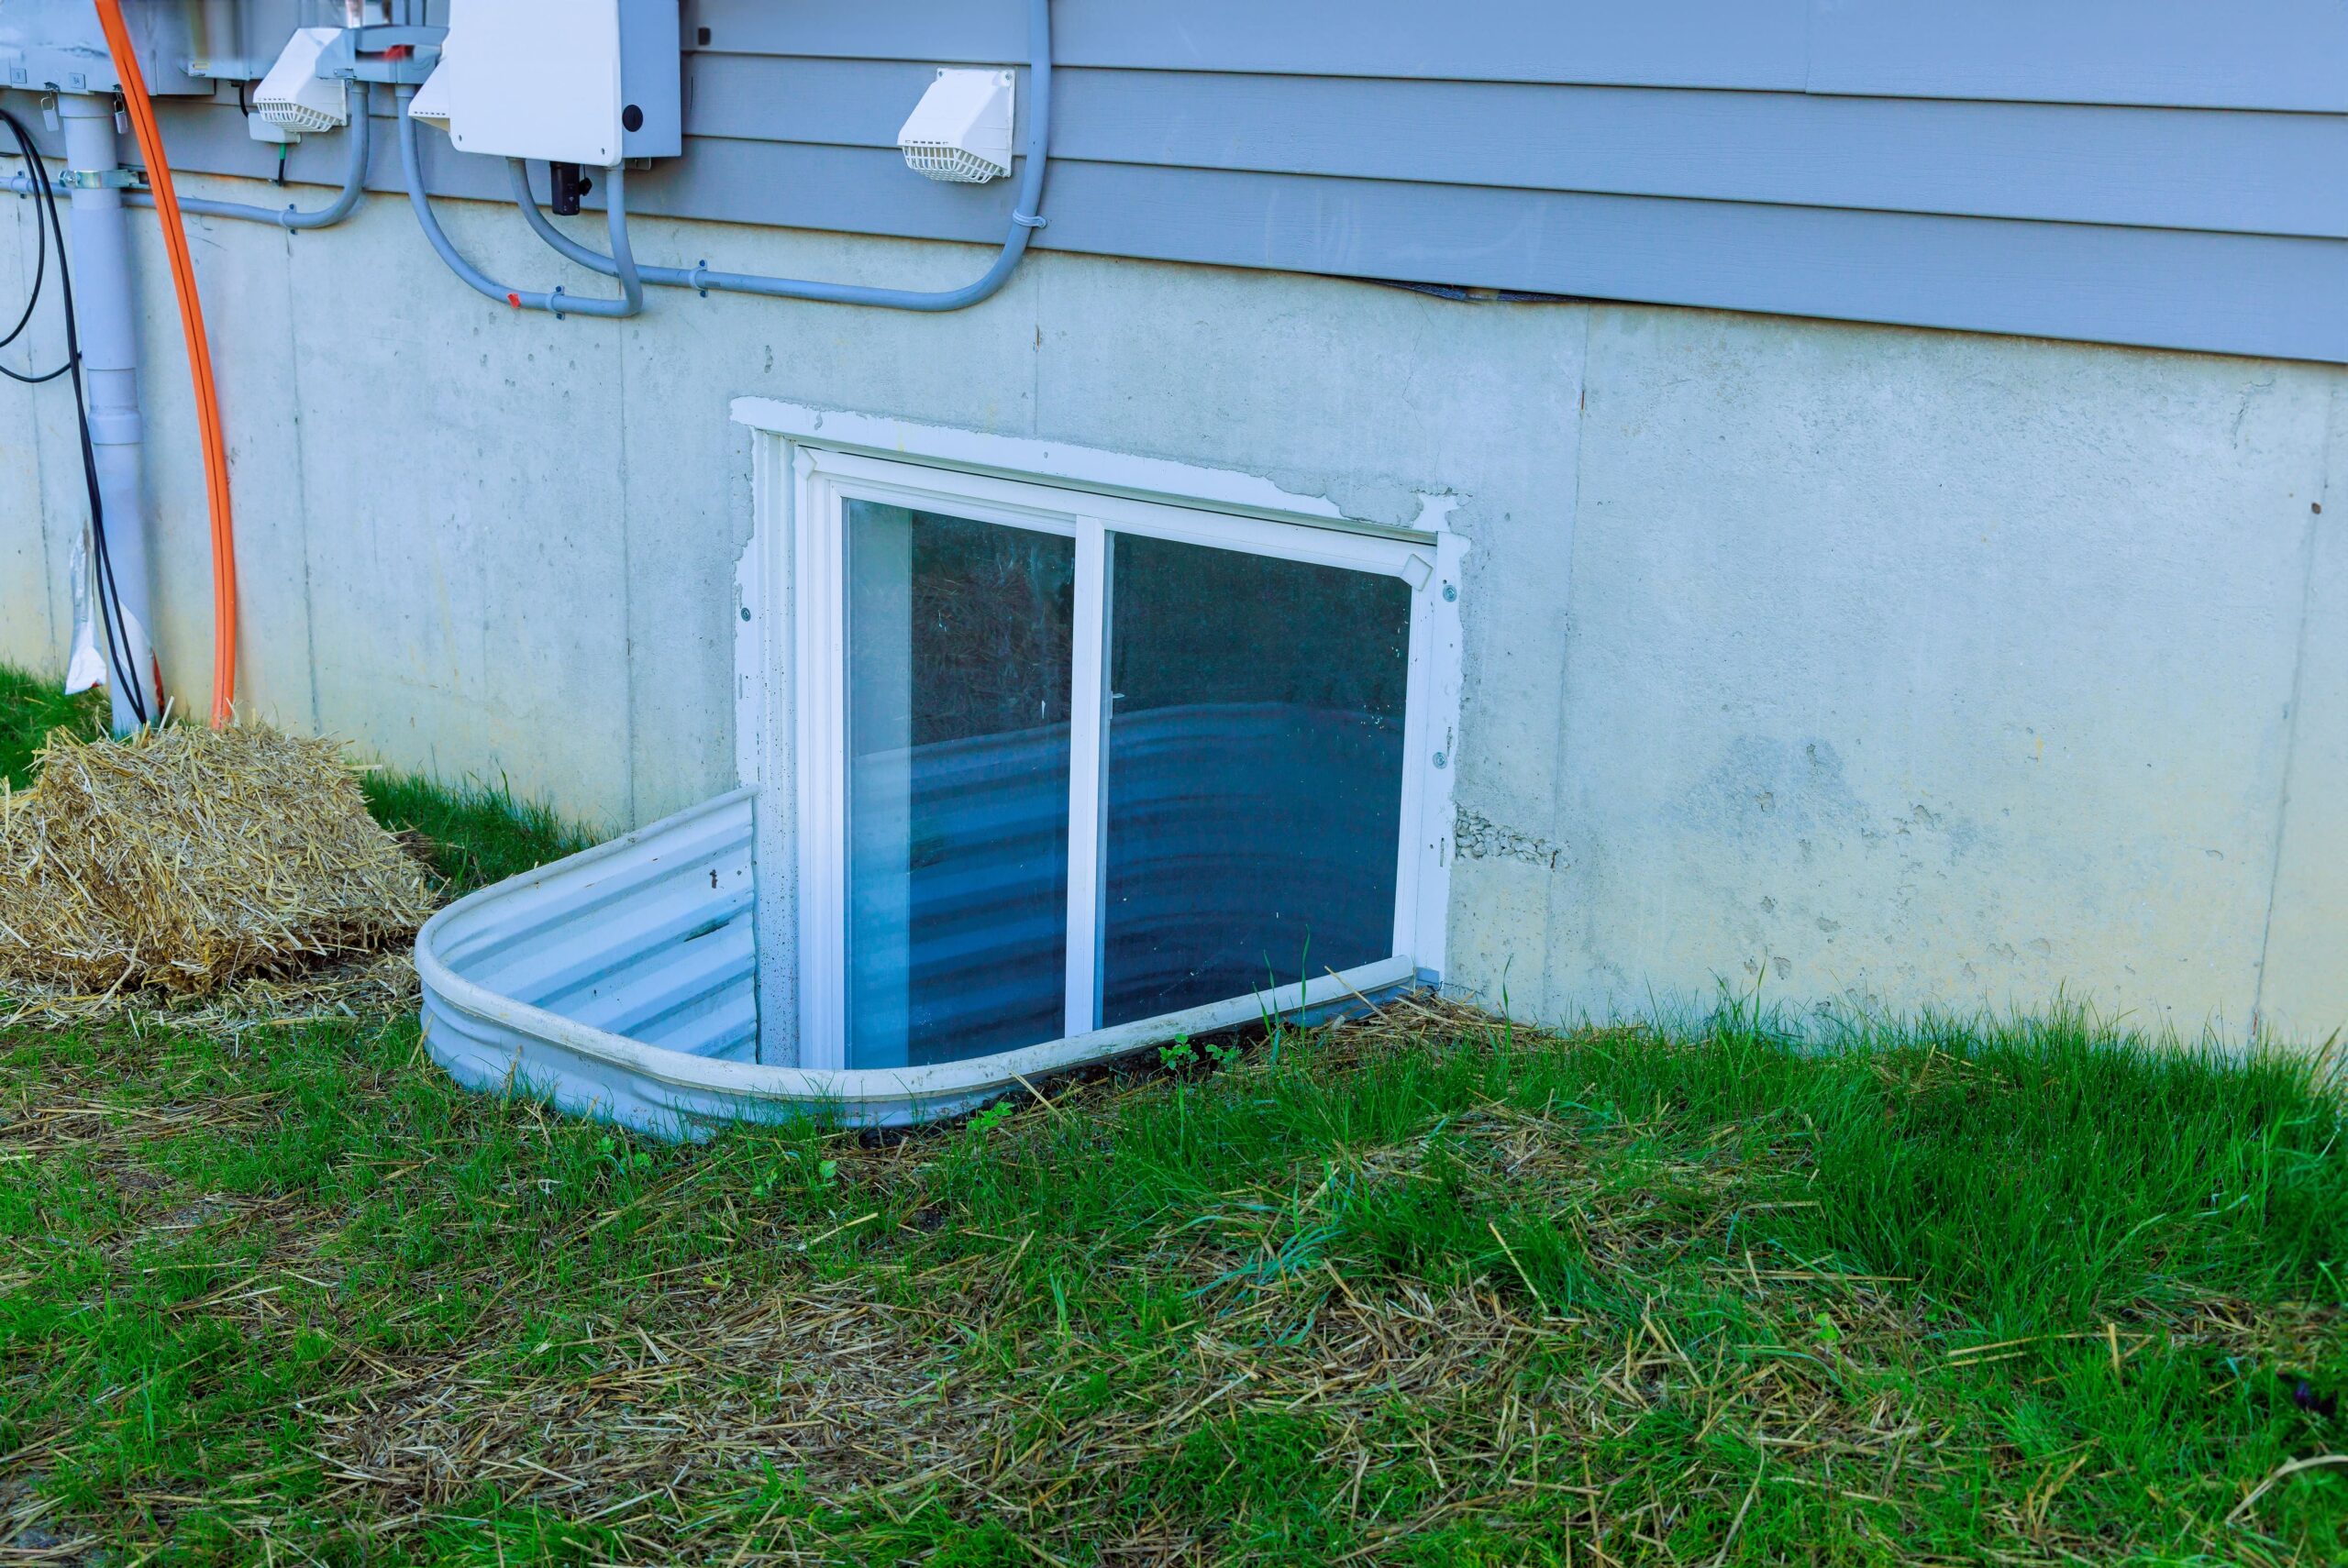 Window Well Leaking: What to Do and How to Prevent it